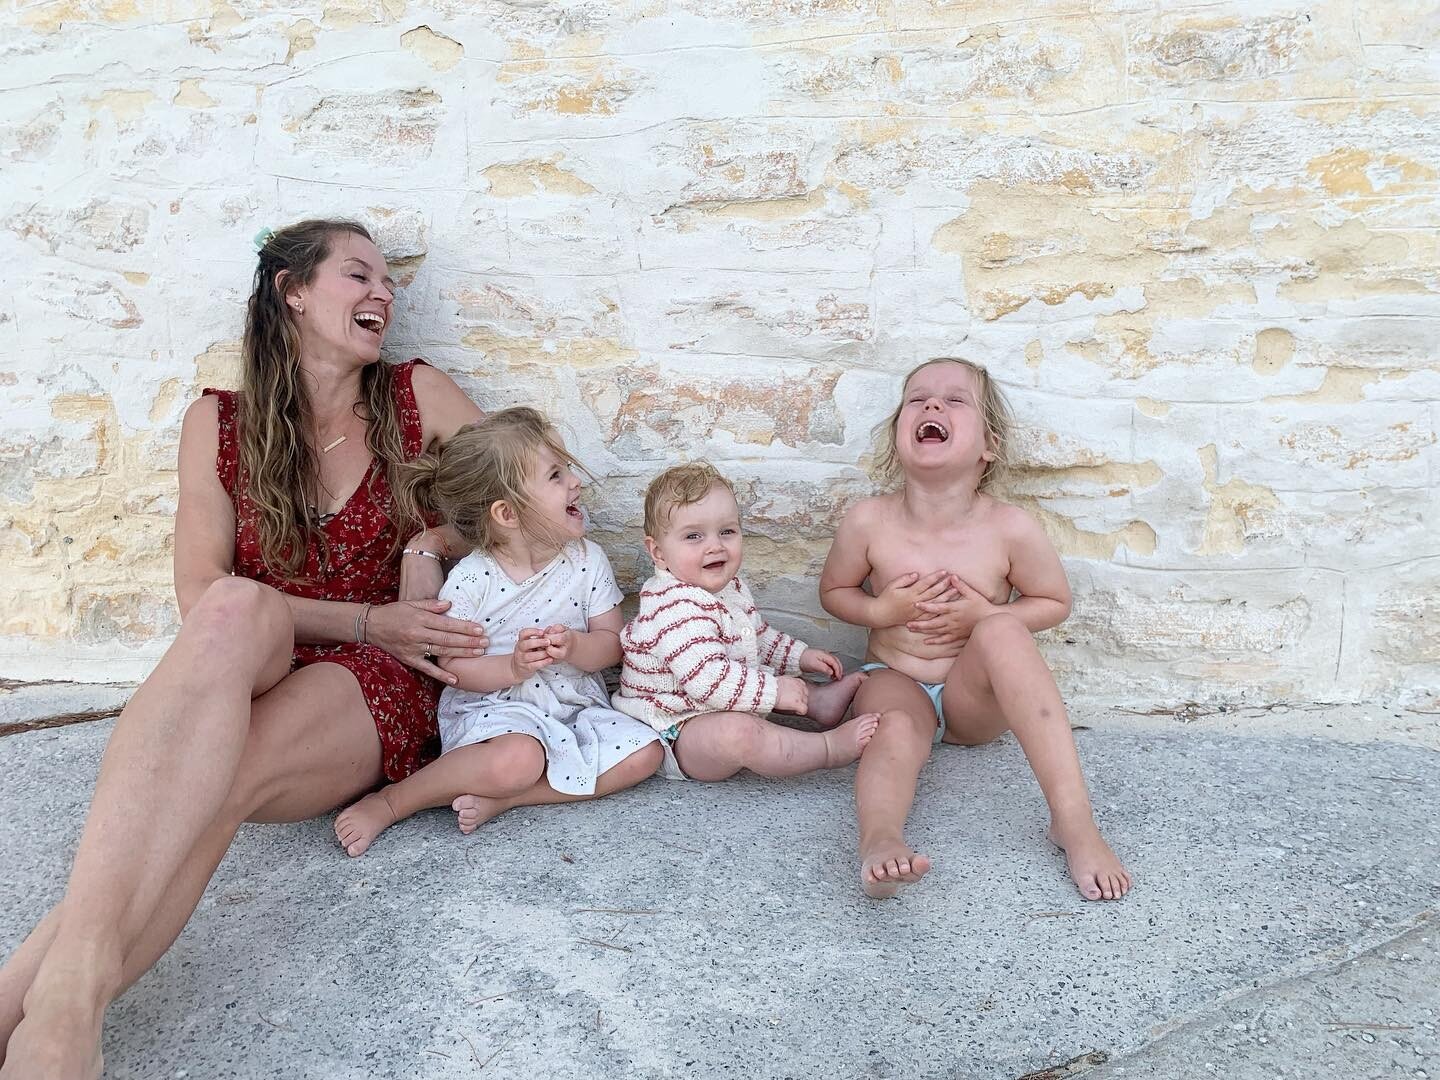 Giggles with the girls 💕🥰 #rotto